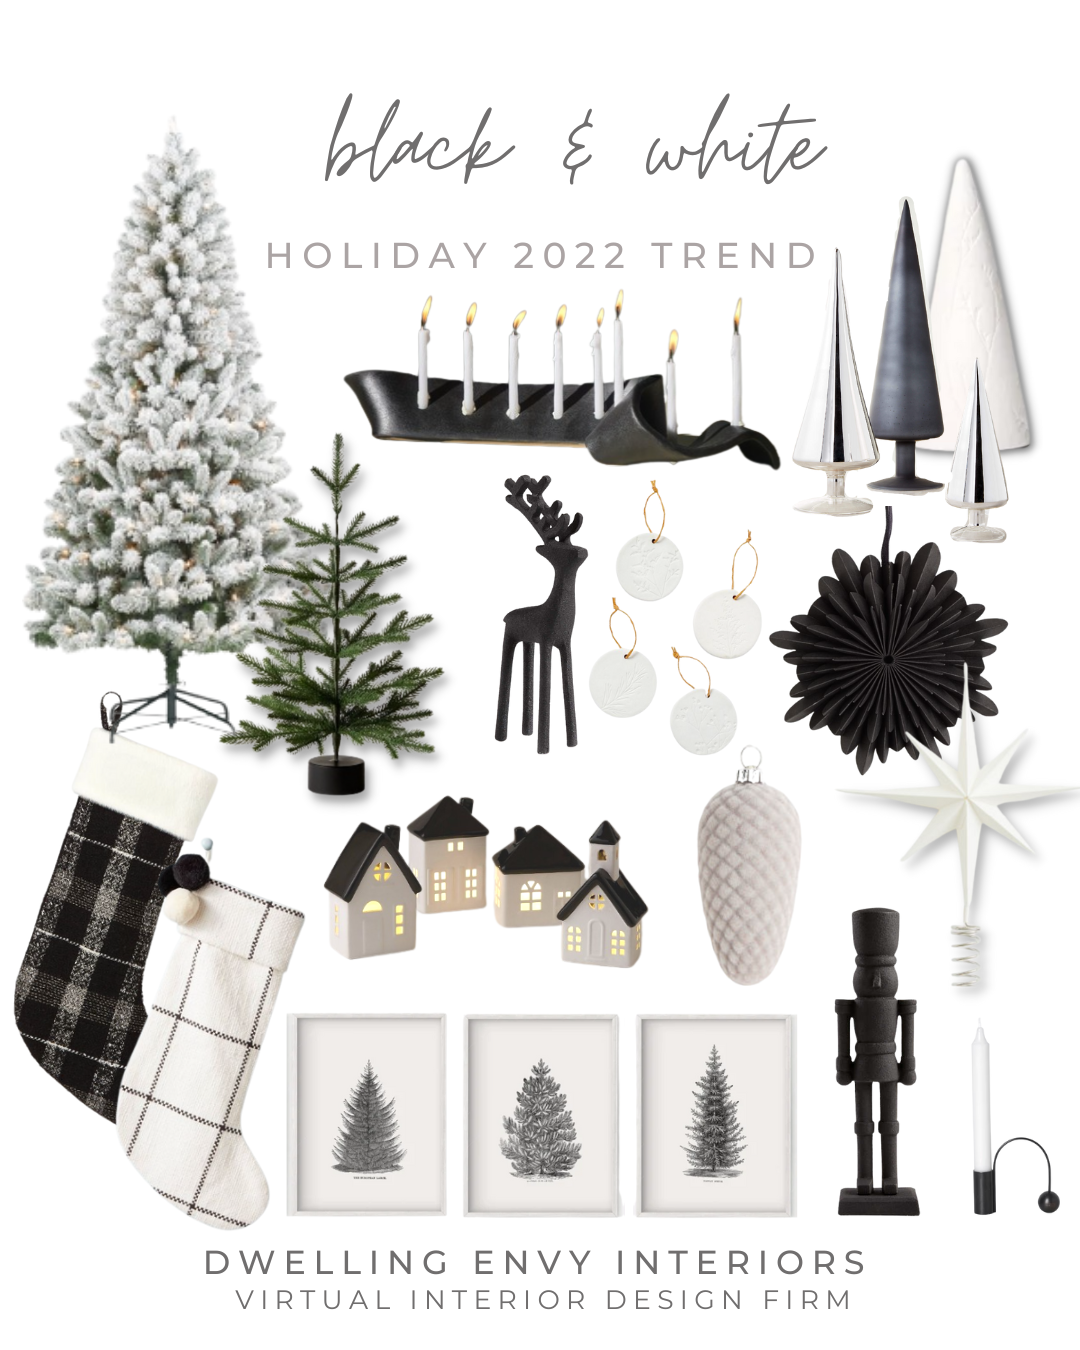 image of Christmas Home Decor items recommended by Dwelling Envy Interiors, black and white evergreen trees, flocked christmas trees, black nutcracker, black and white christmas stockings, modern black menorah